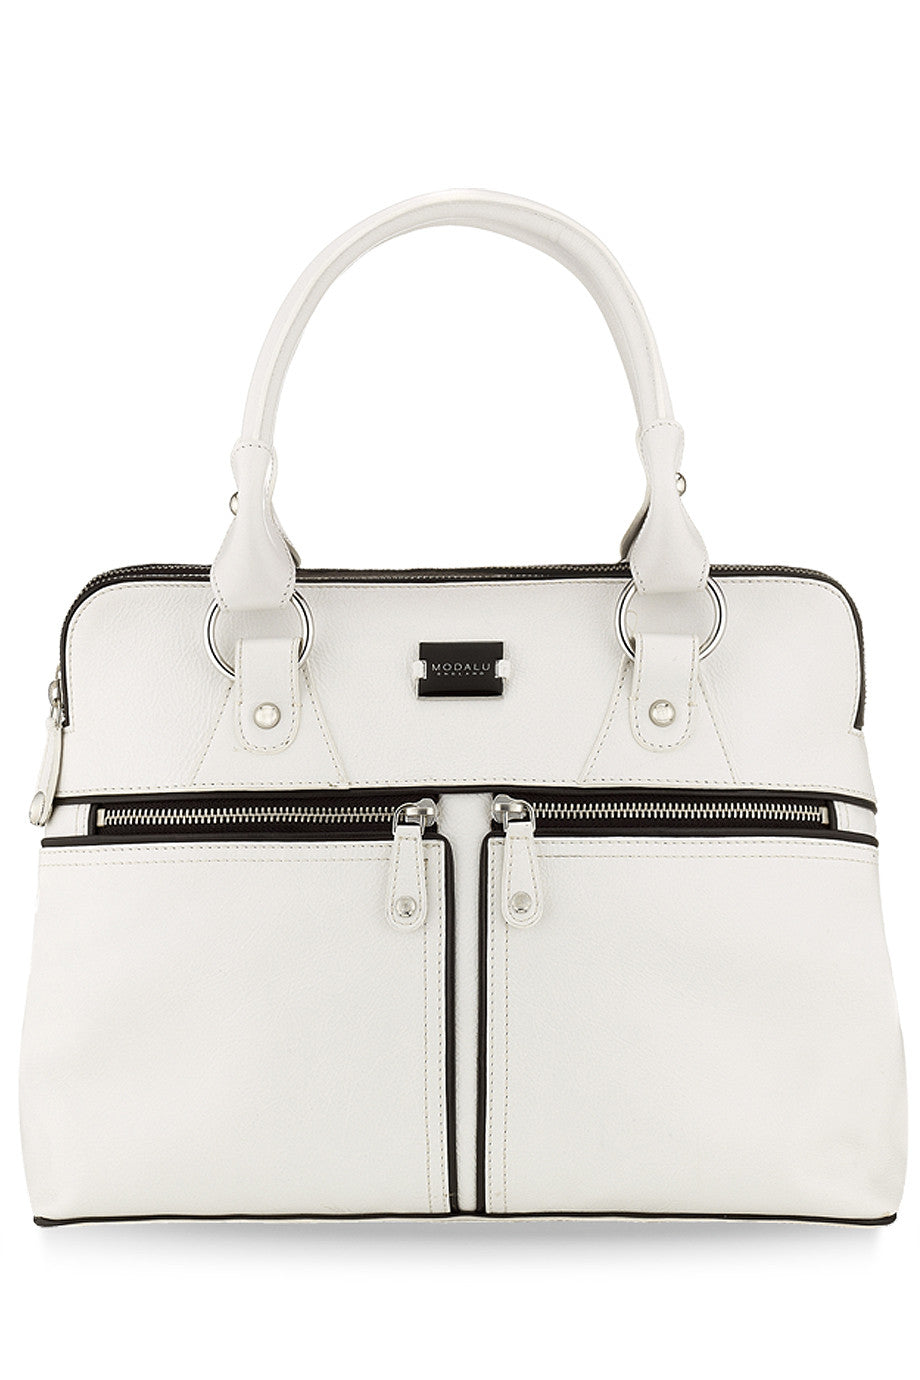 PIPPA White Leather Bag